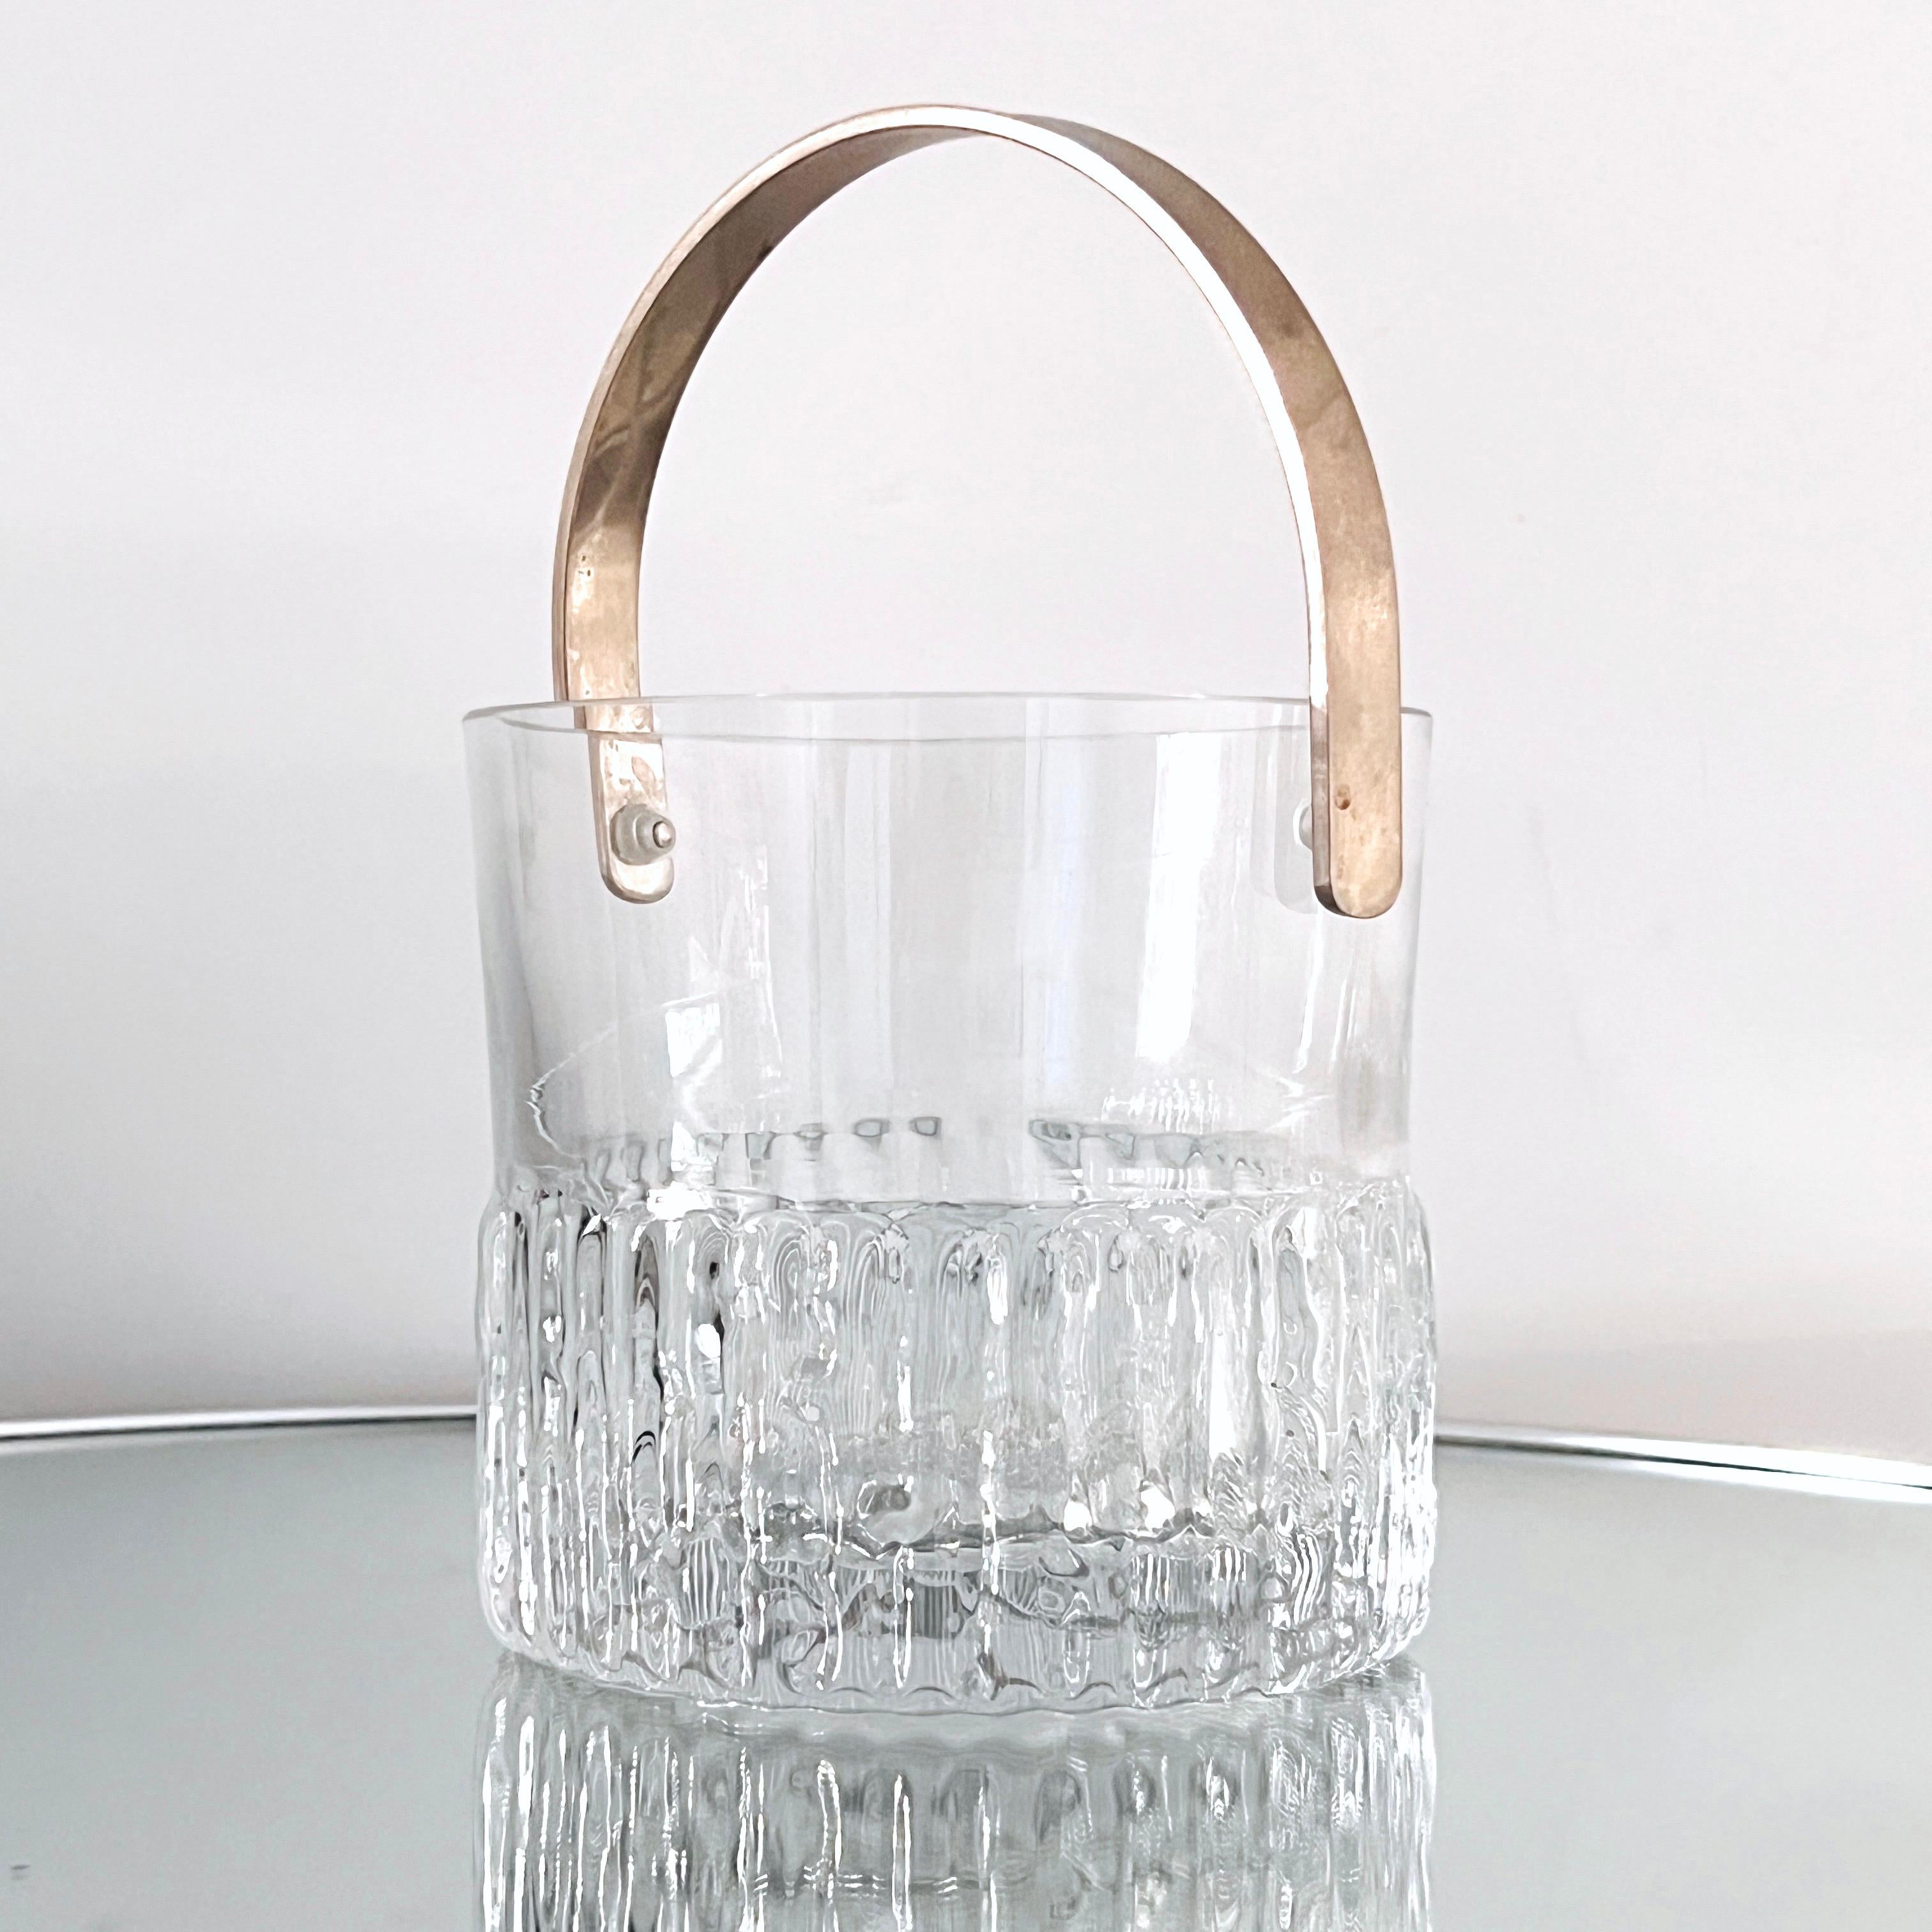 Mid-Century Modern Crystal Ice Bucket with Textured Glass, France, c. 1970s In Good Condition For Sale In Fort Lauderdale, FL